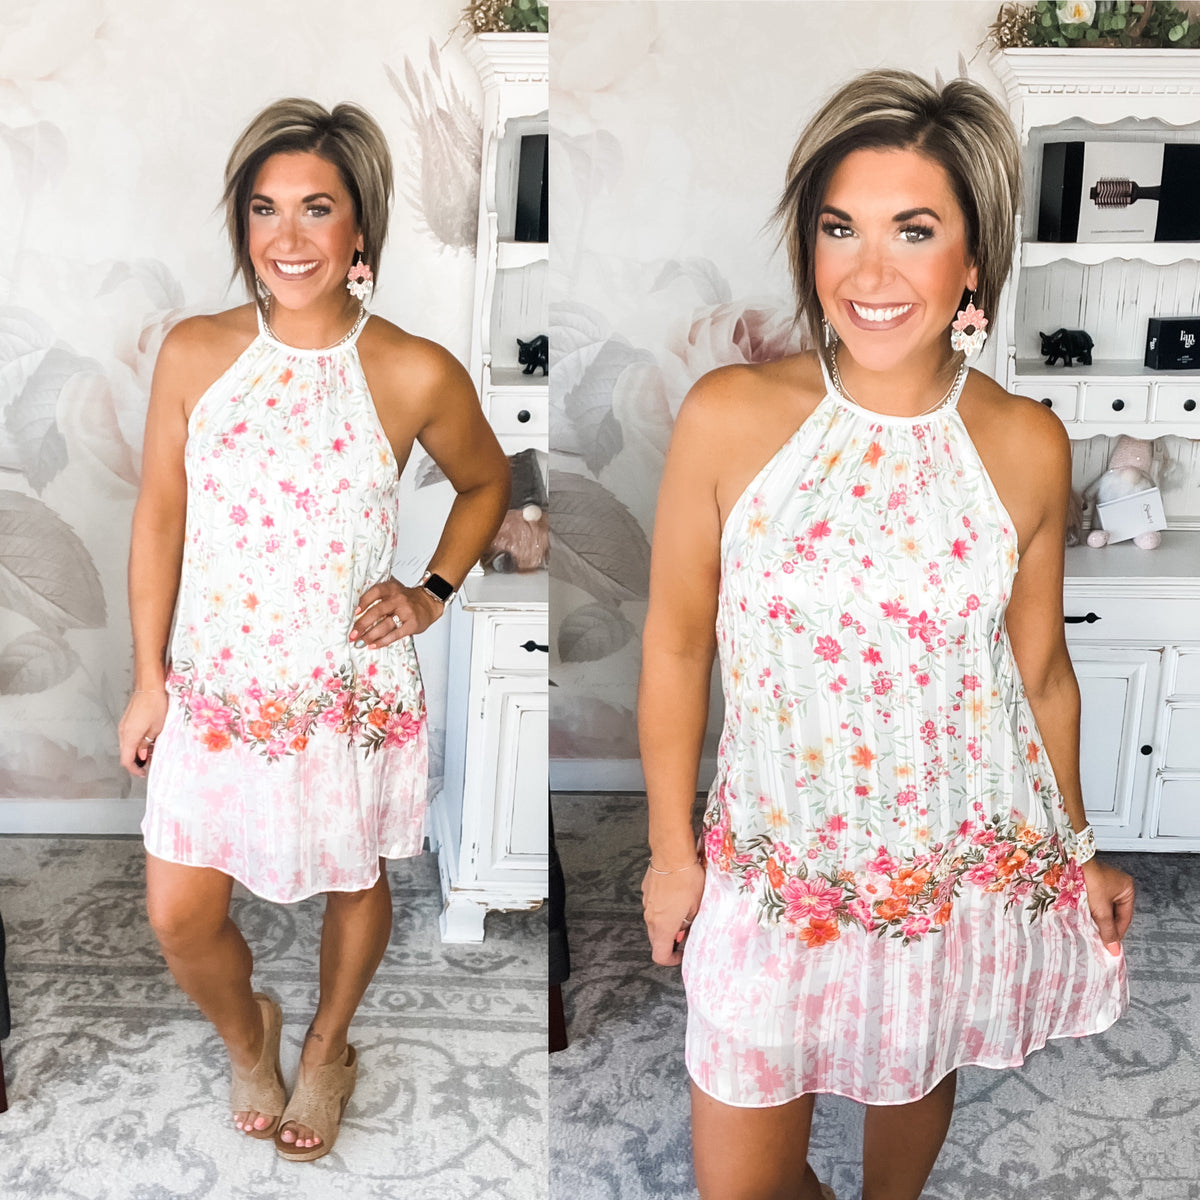 Feeling Excited Floral Dress